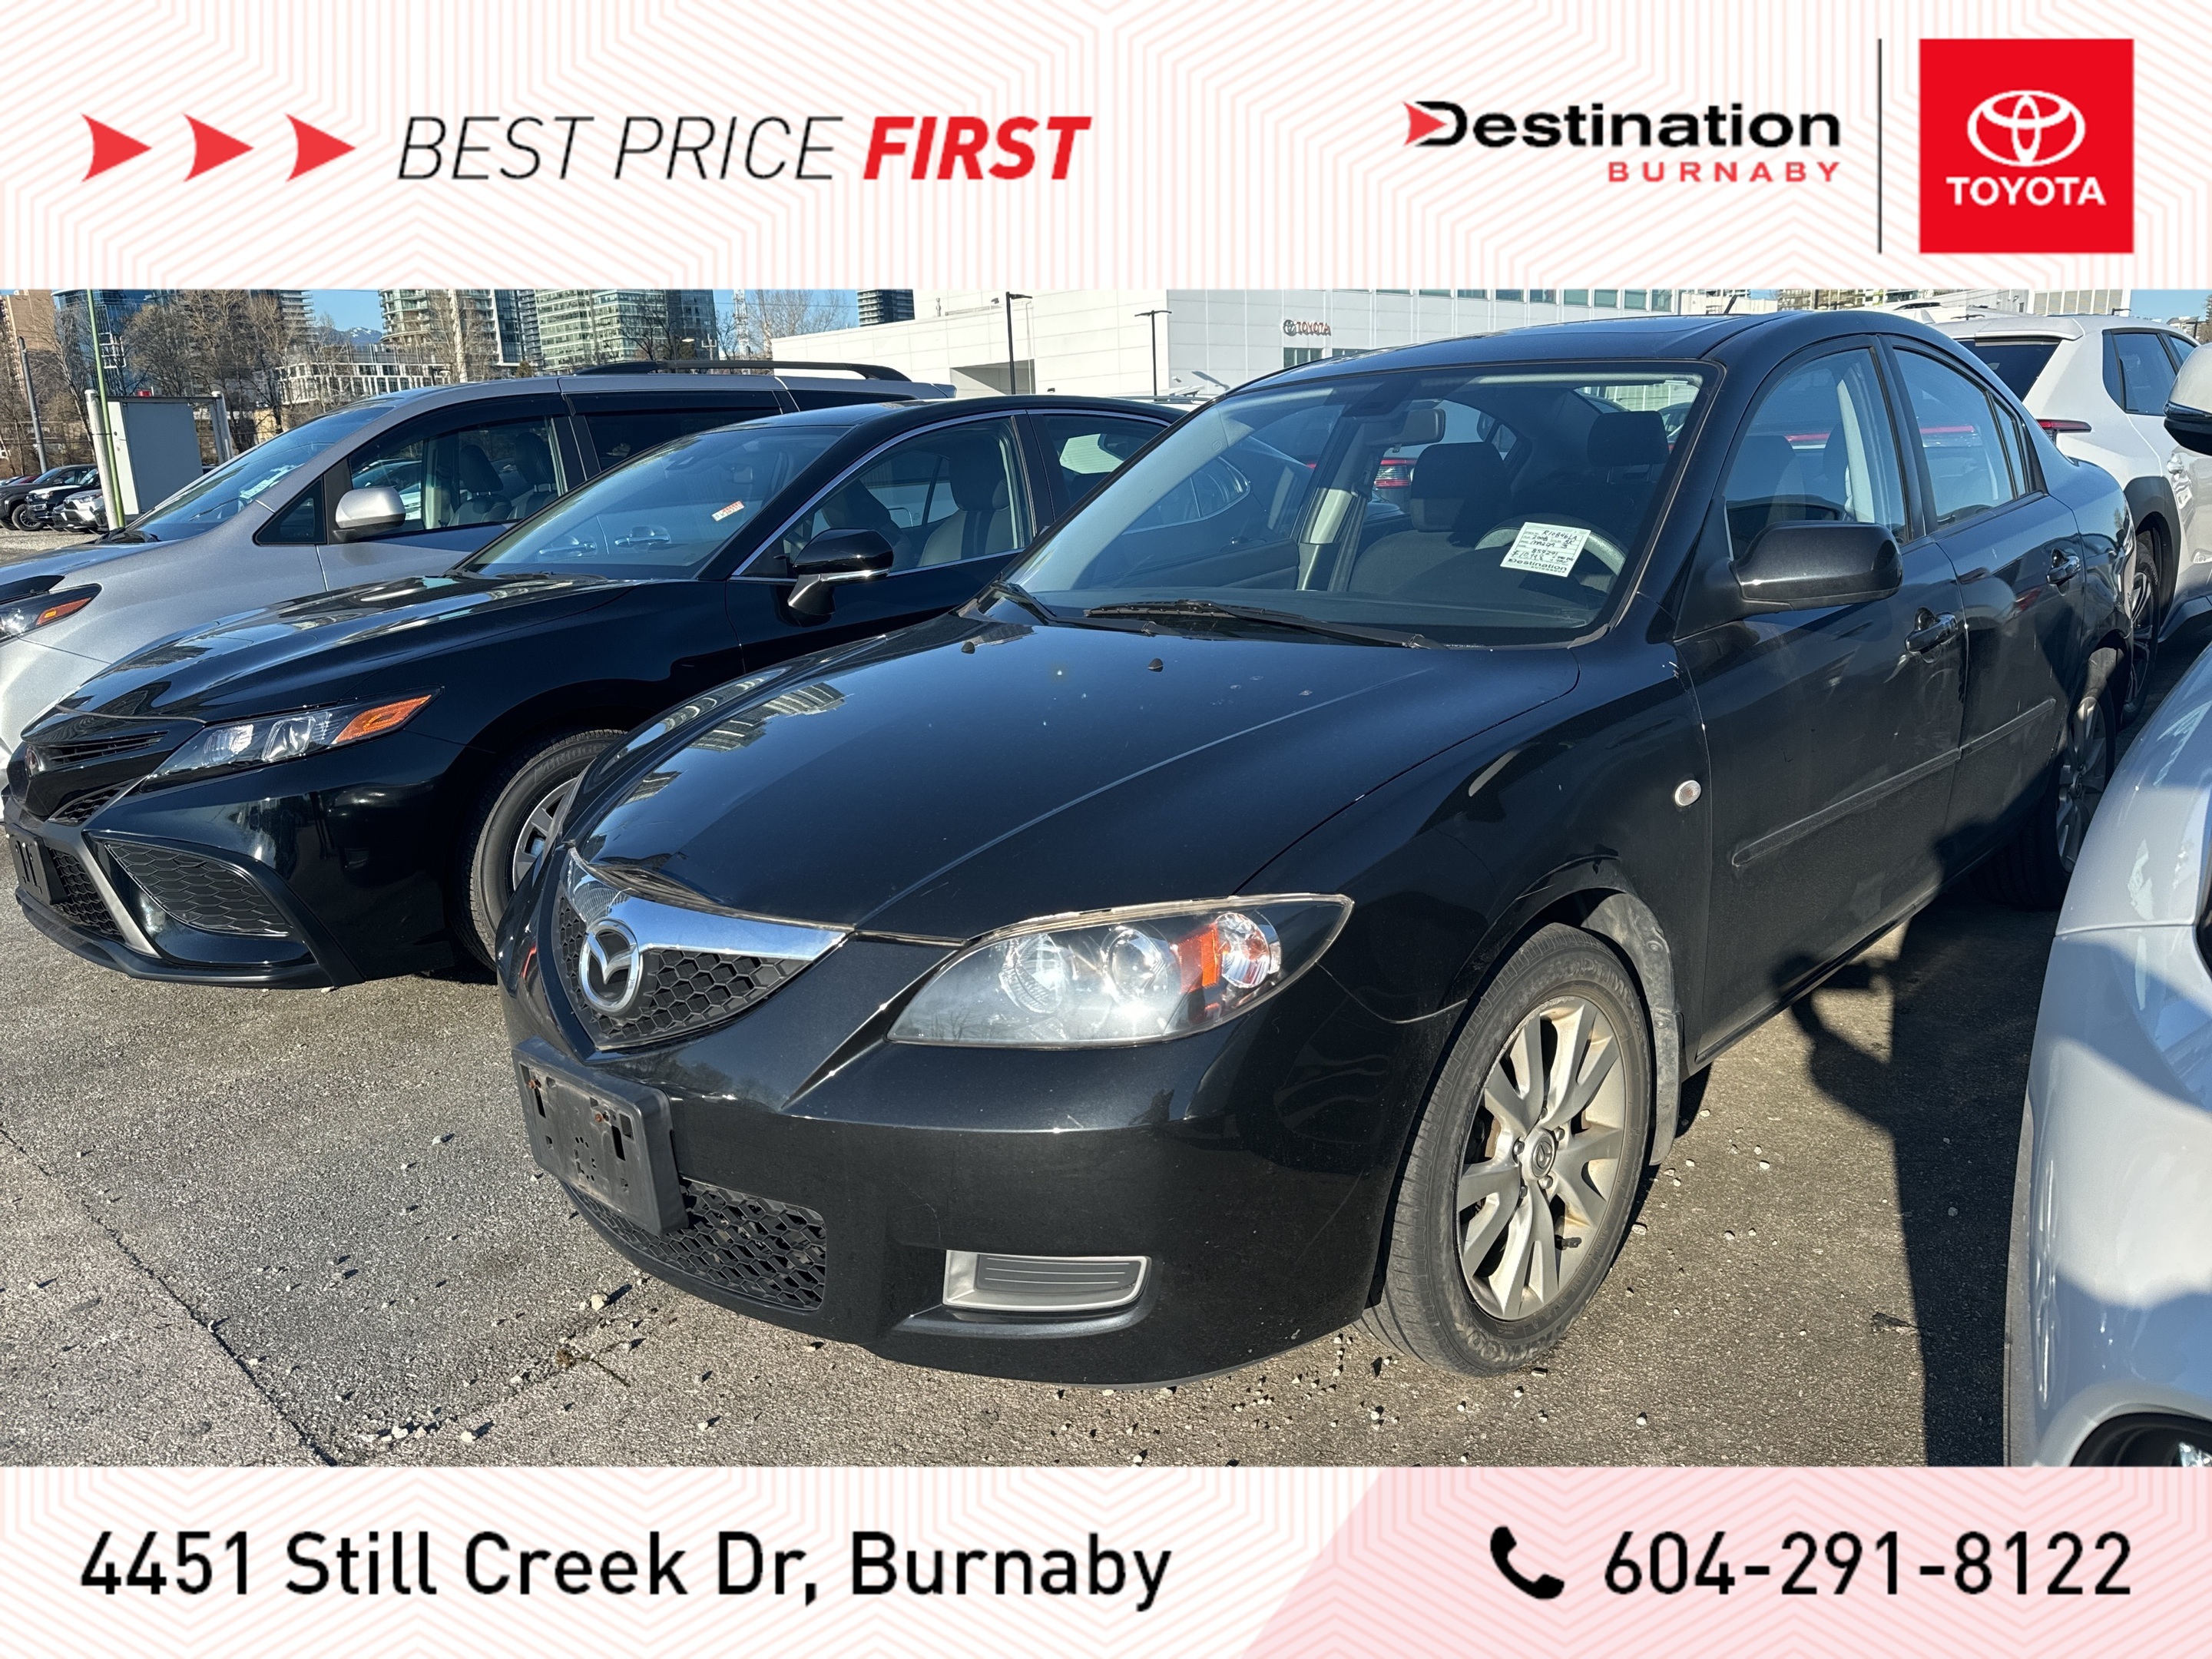 2008 Mazda Mazda3 GX - Locally owned with one owner!